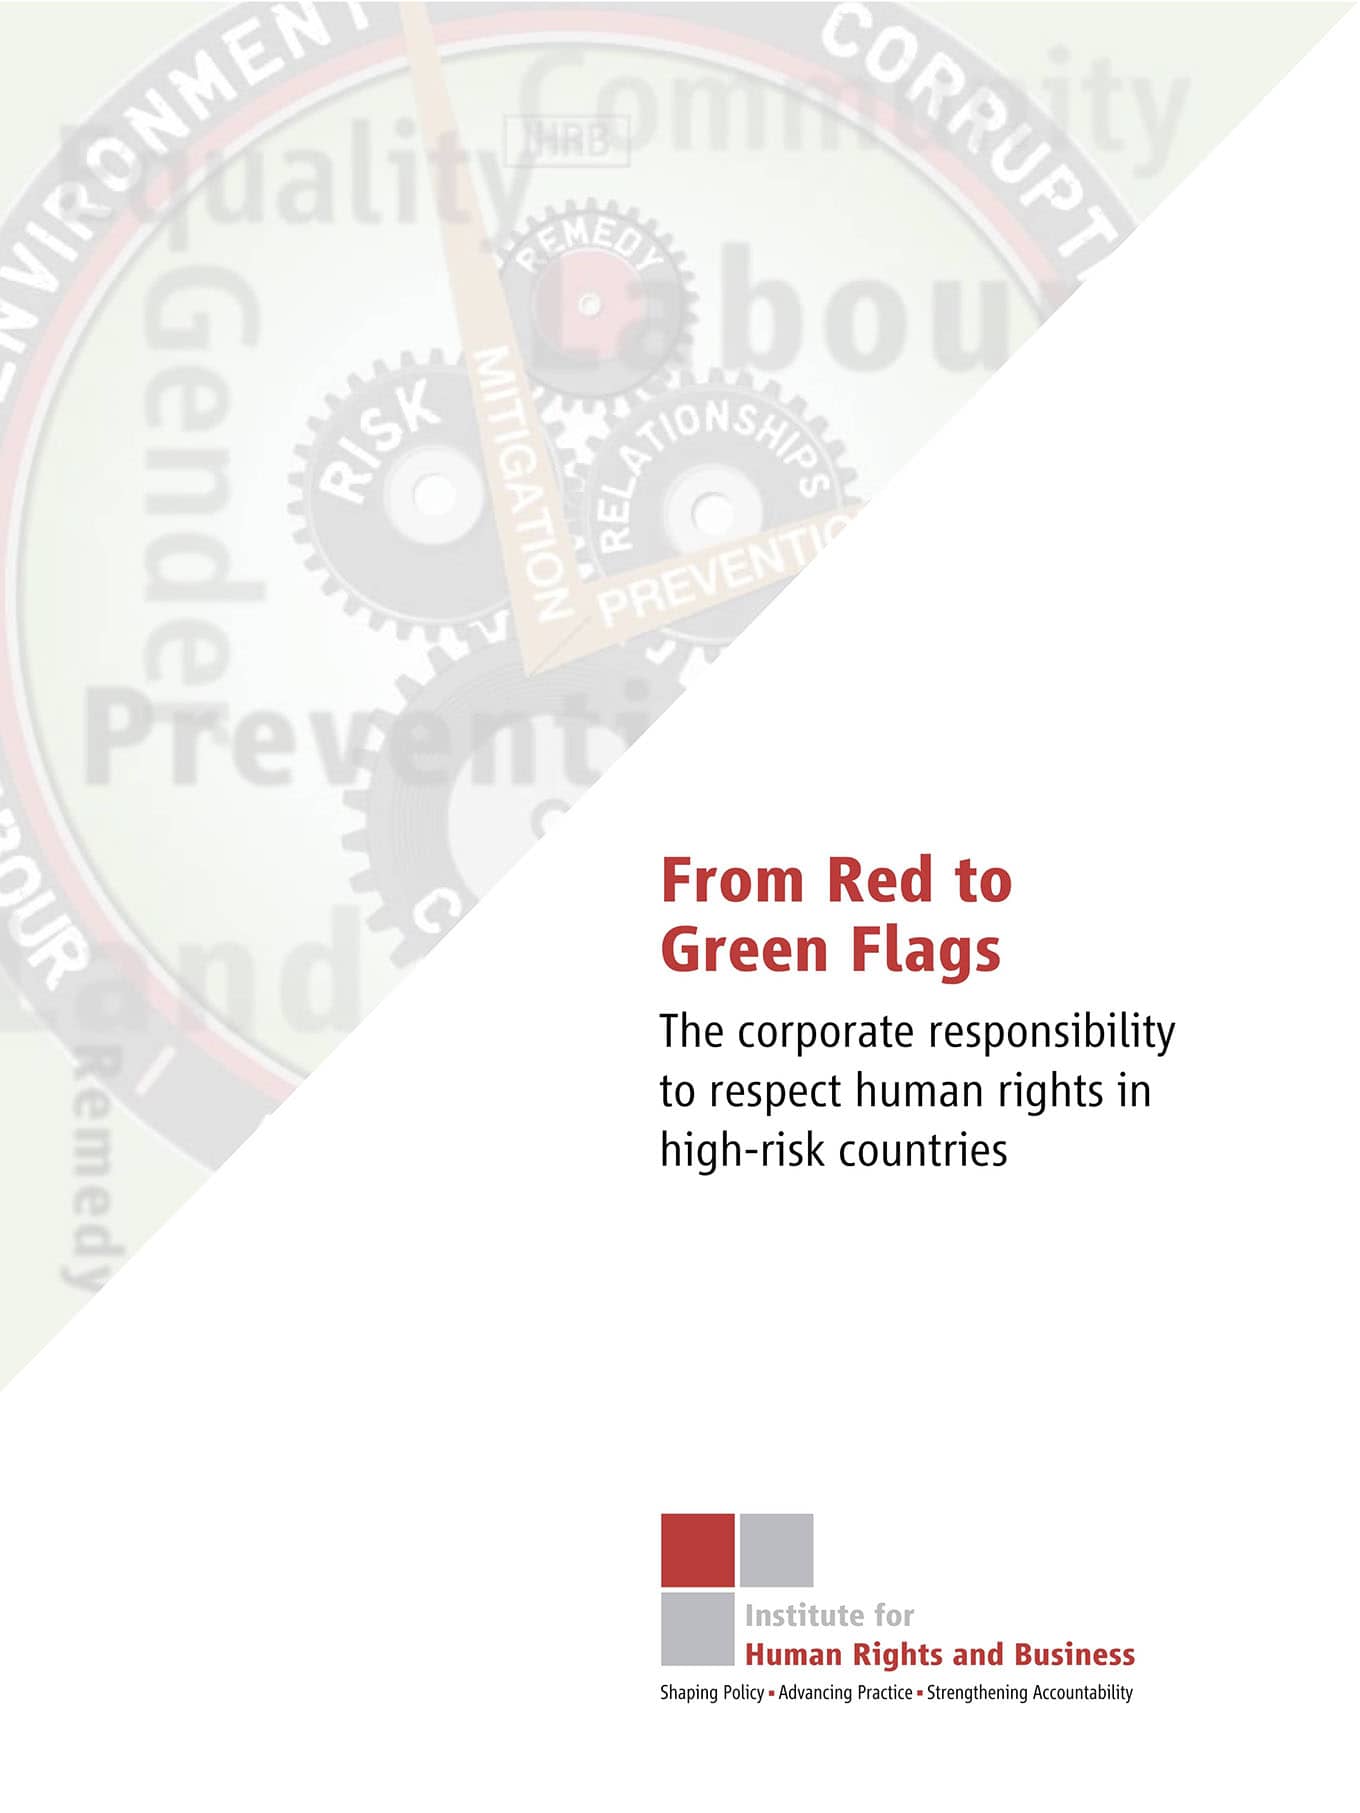 From Red to Green Flags - The Corporate Responsibility to Respect Human Rights in High-risk Countries (Institute for Human Rights and Business, 2011)